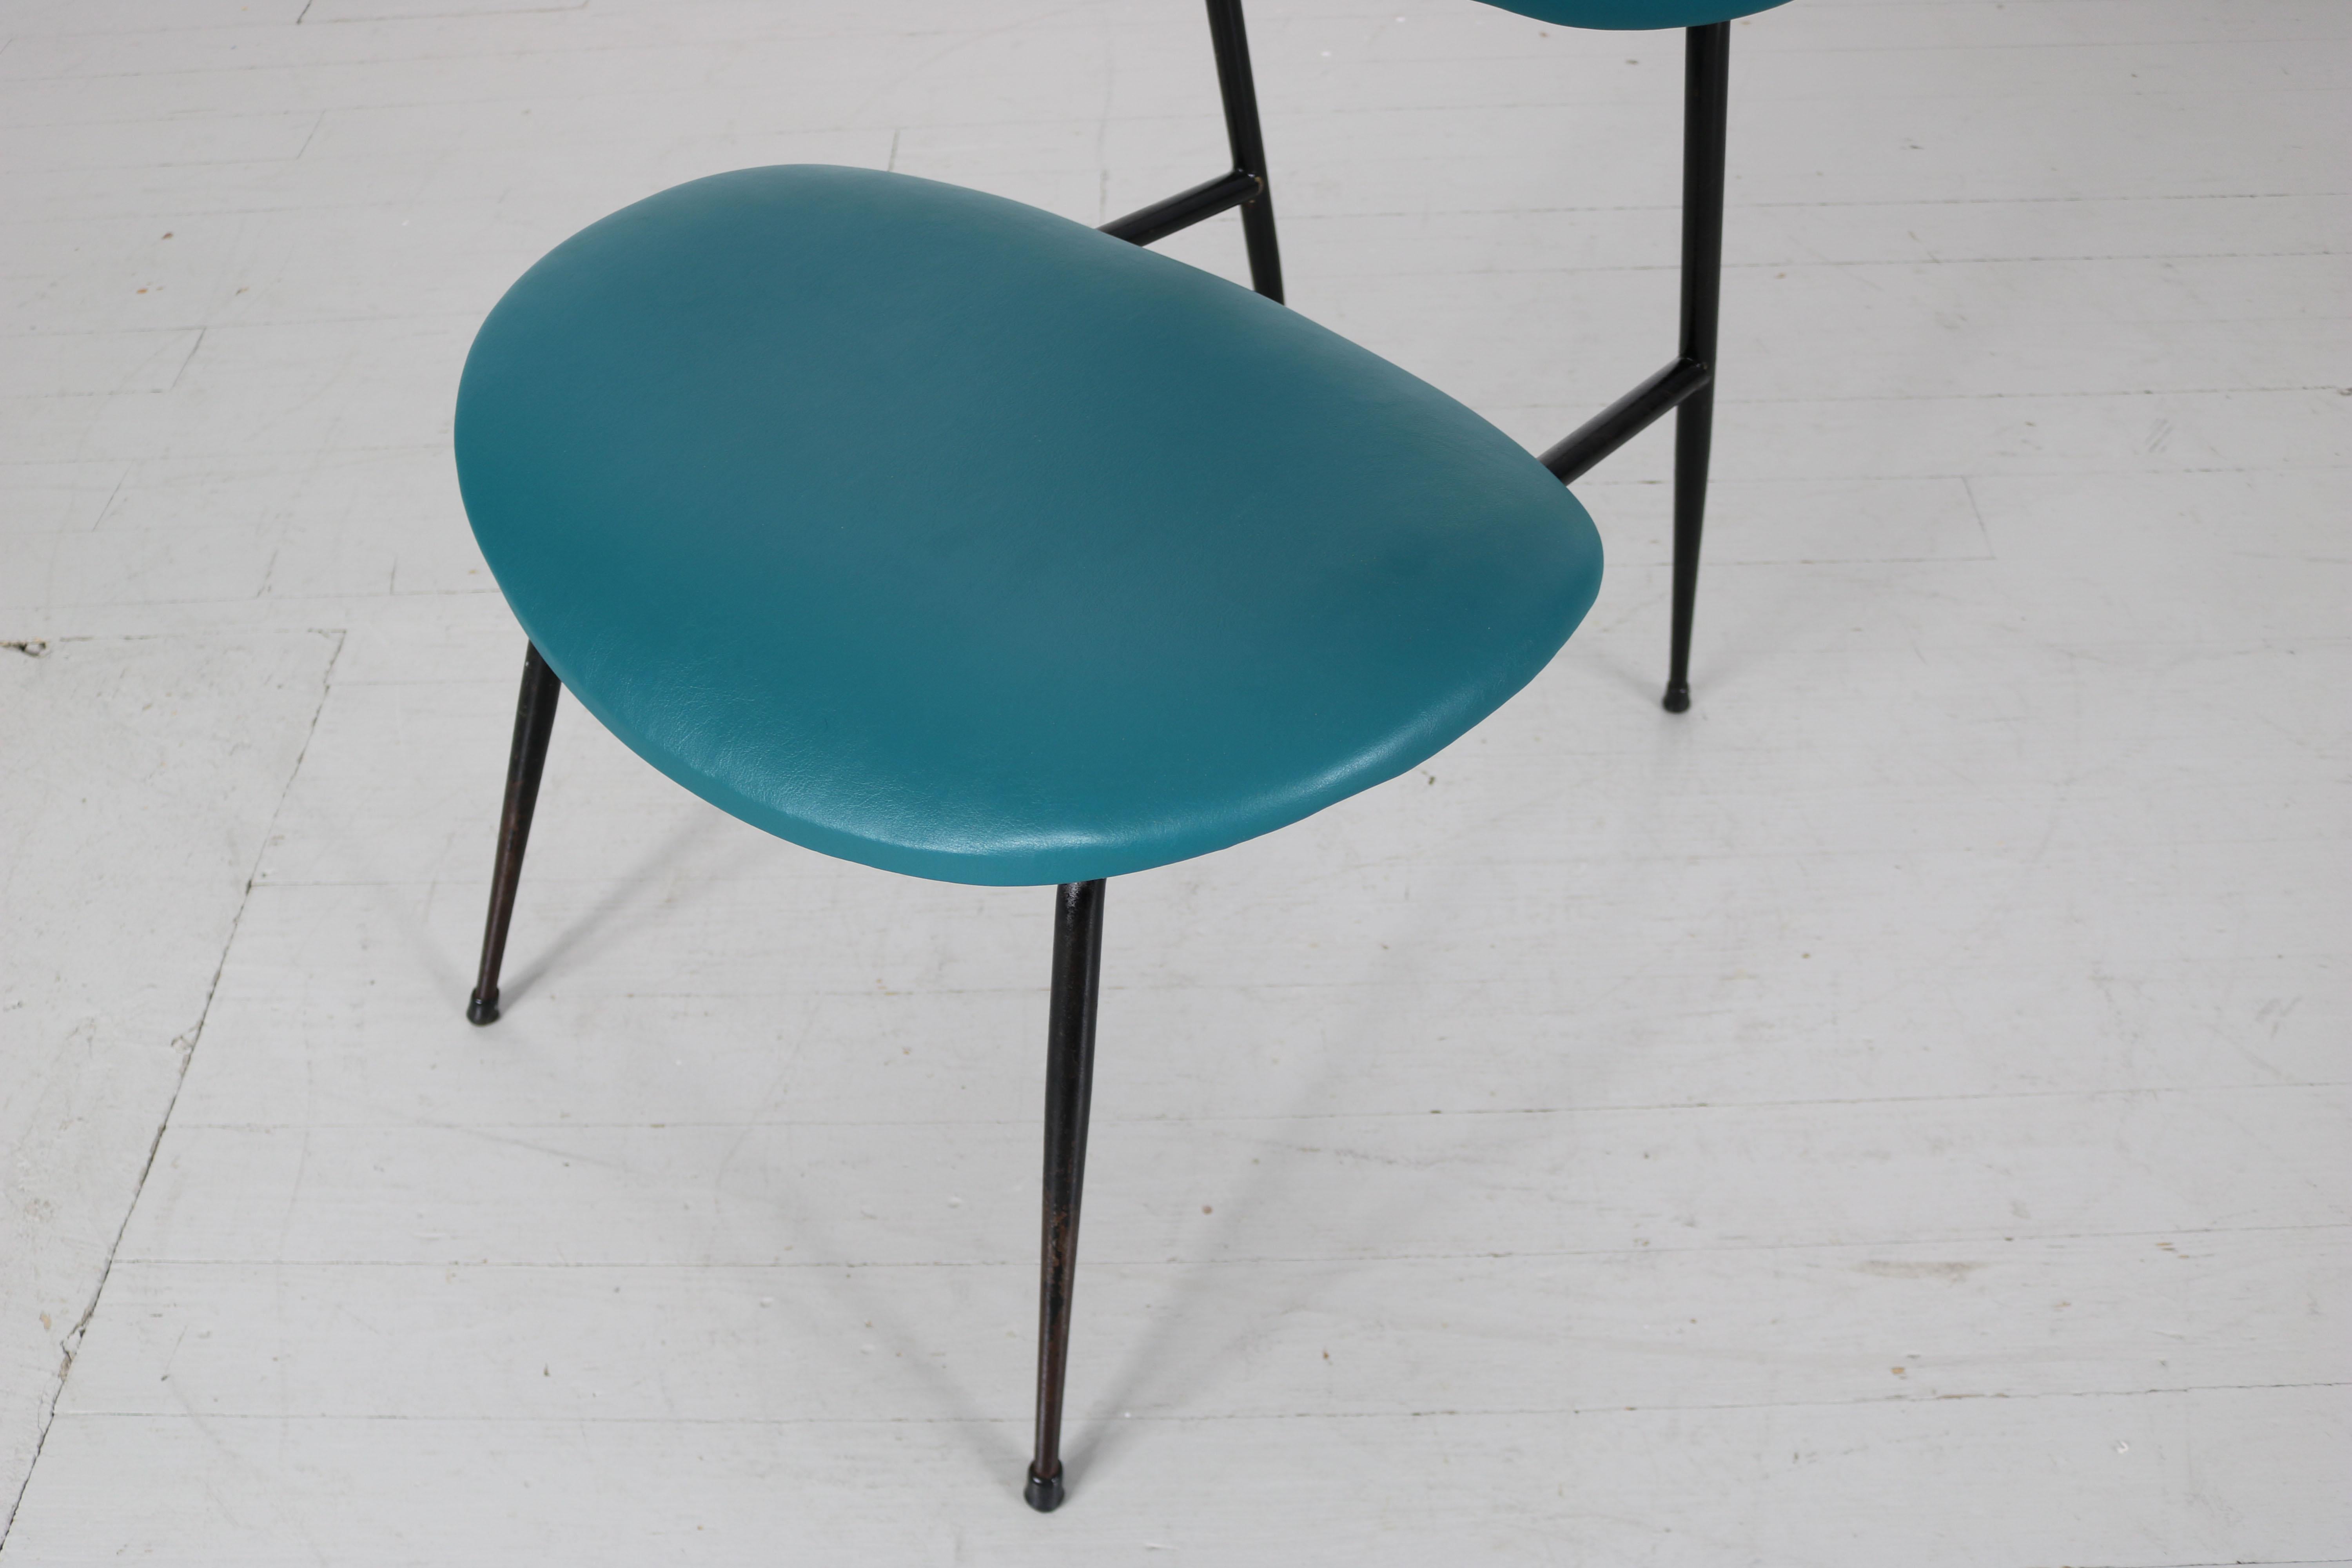 Faux Leather Turquoise Armchair with Imitation Leather Cover, Italy, 1950s